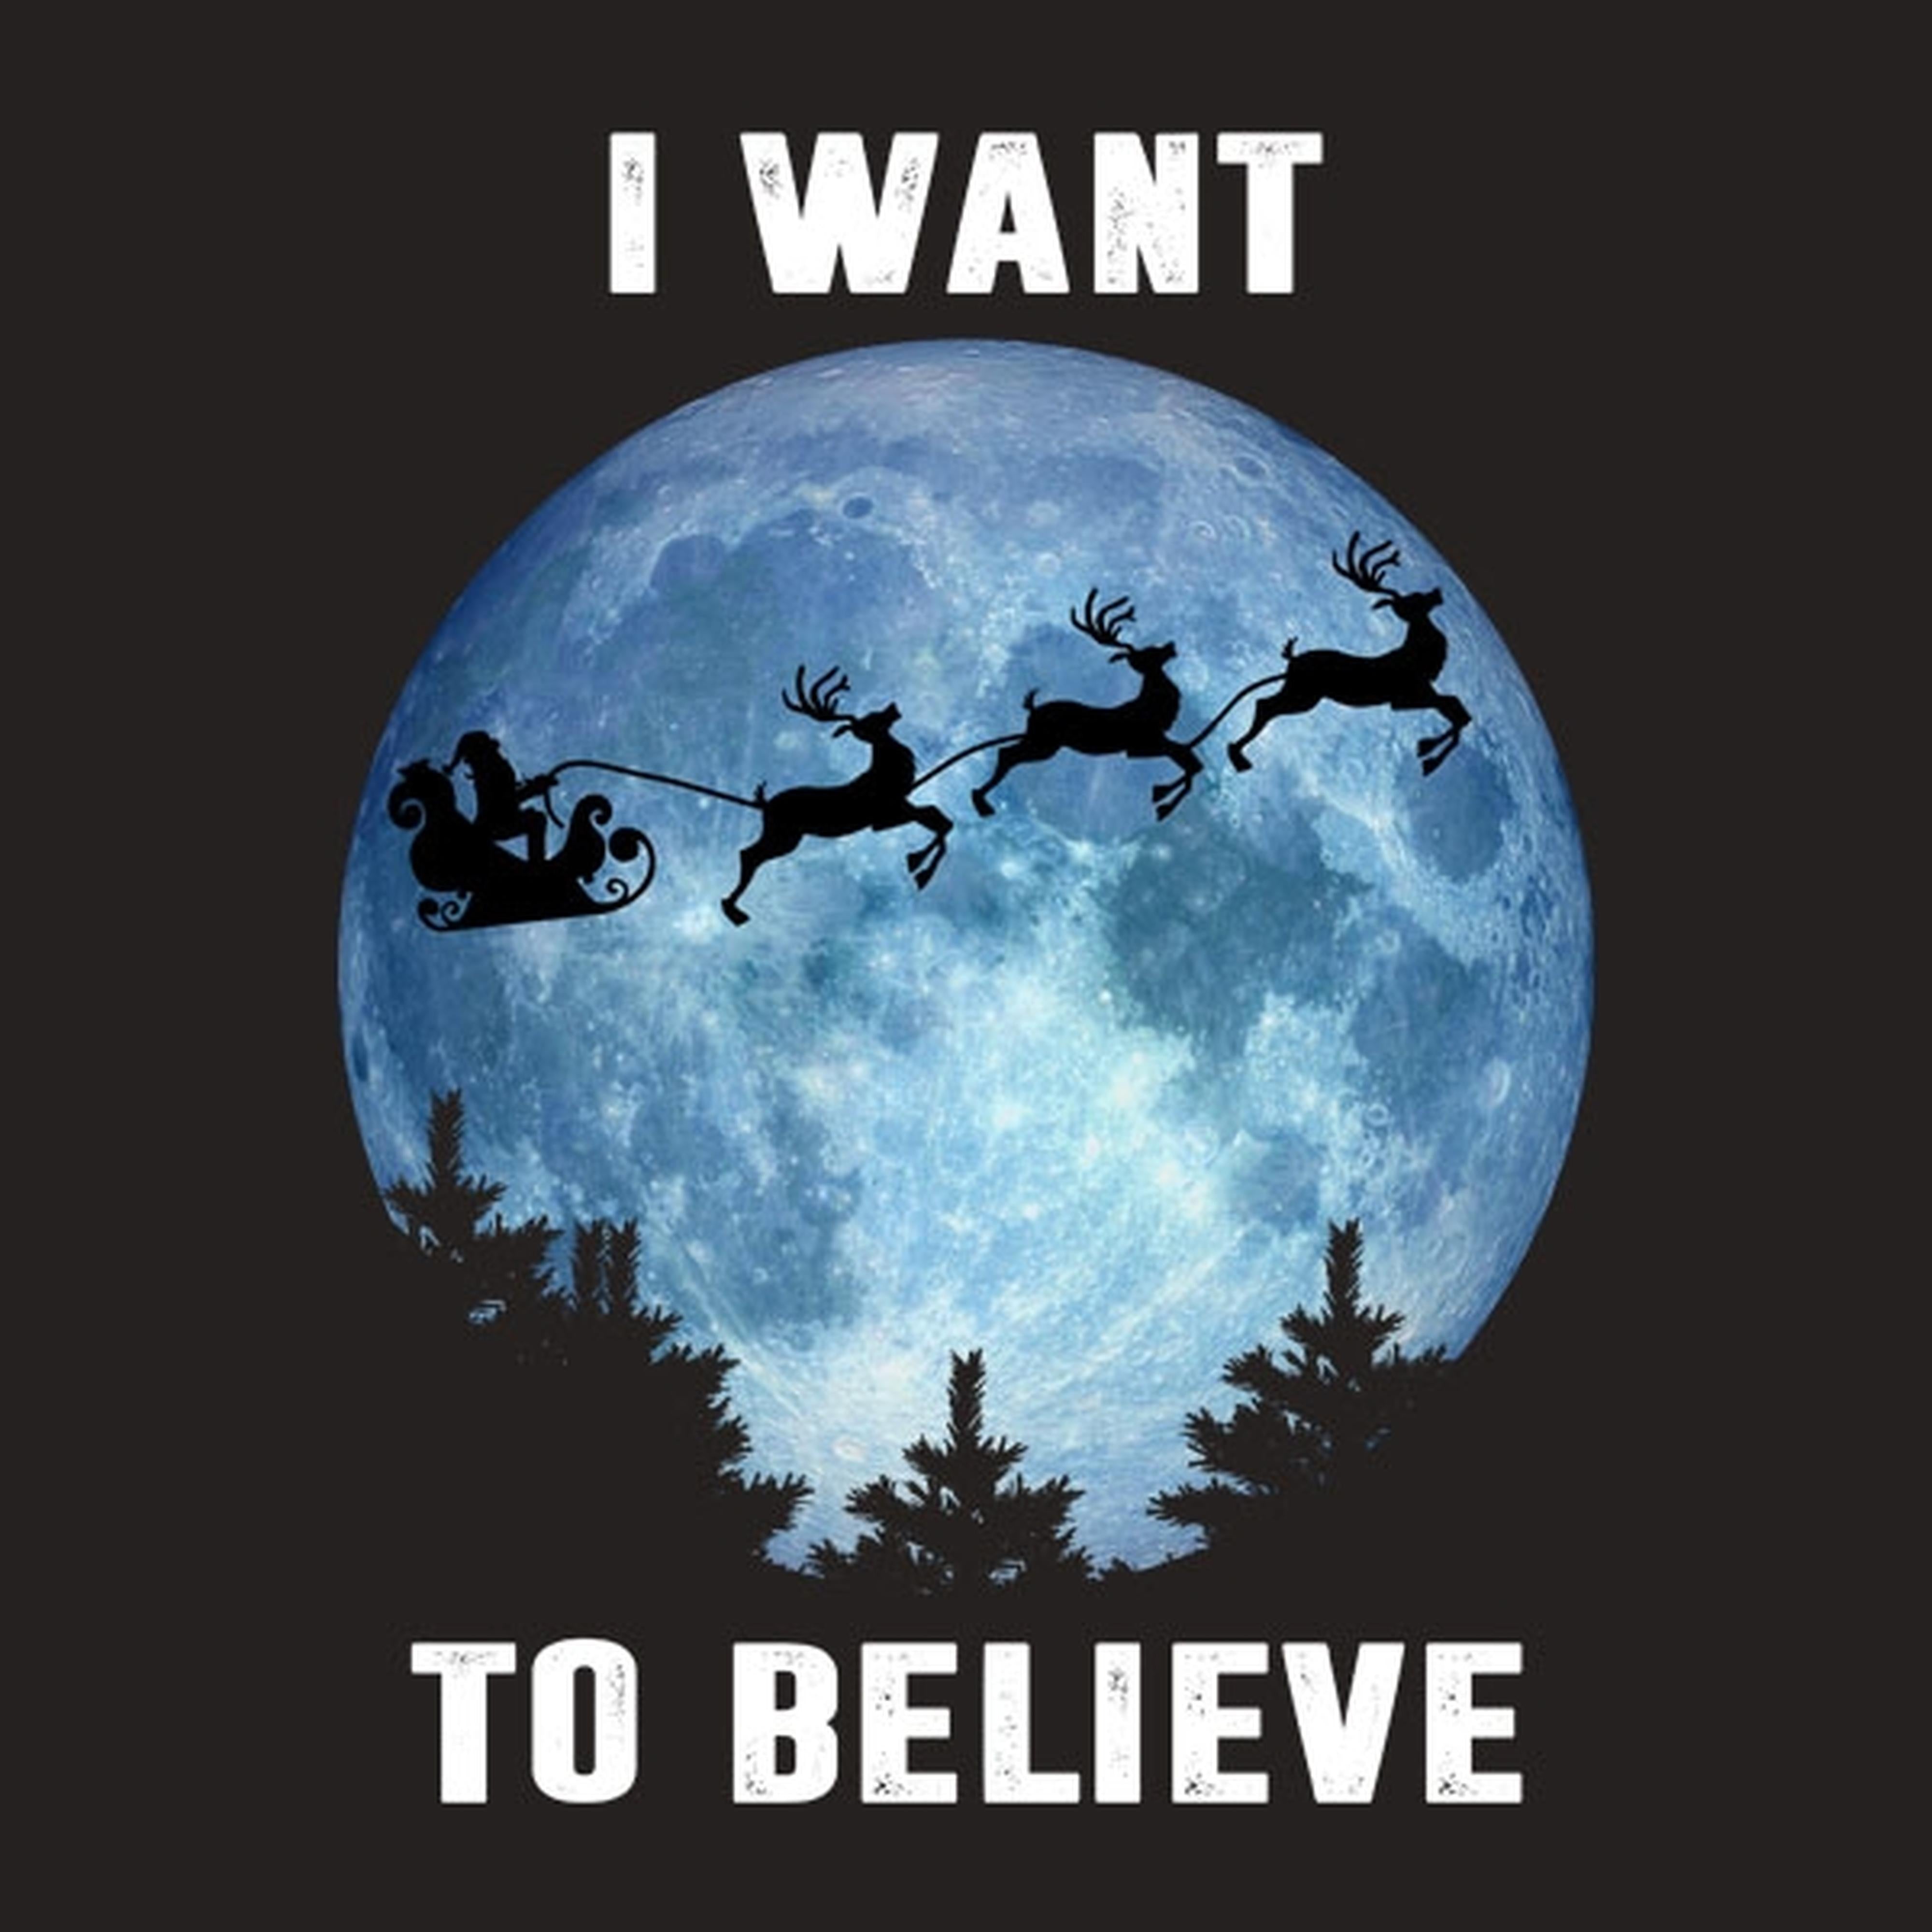 I want to believe in Santa - T-shirt